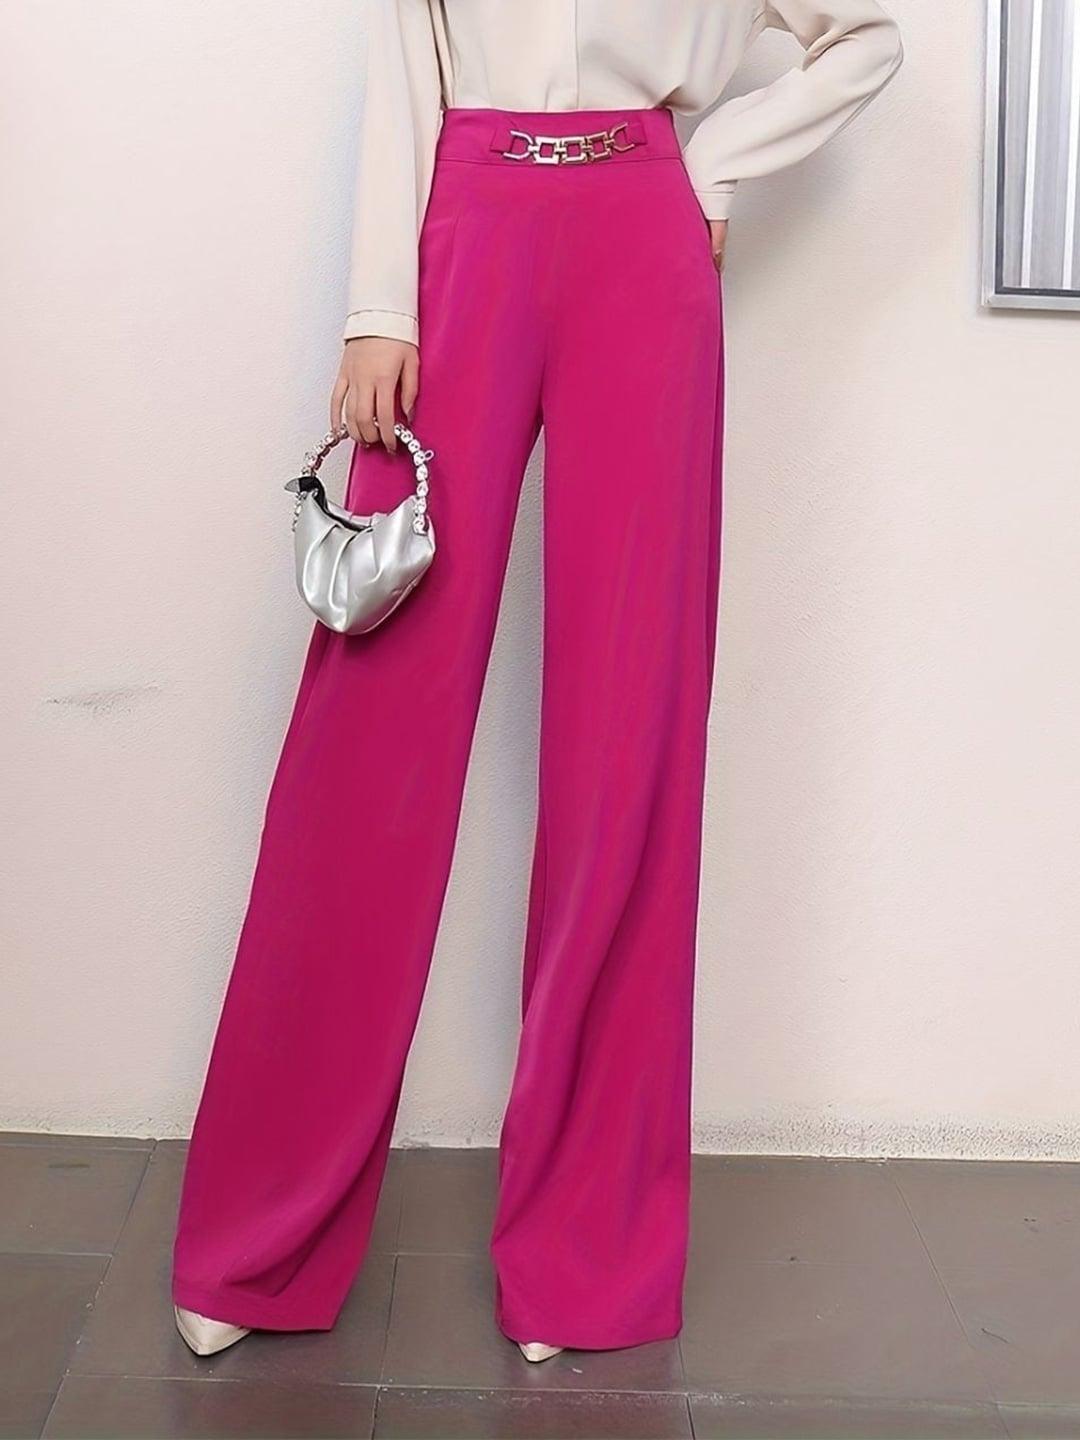 stylecast women pink flared trousers